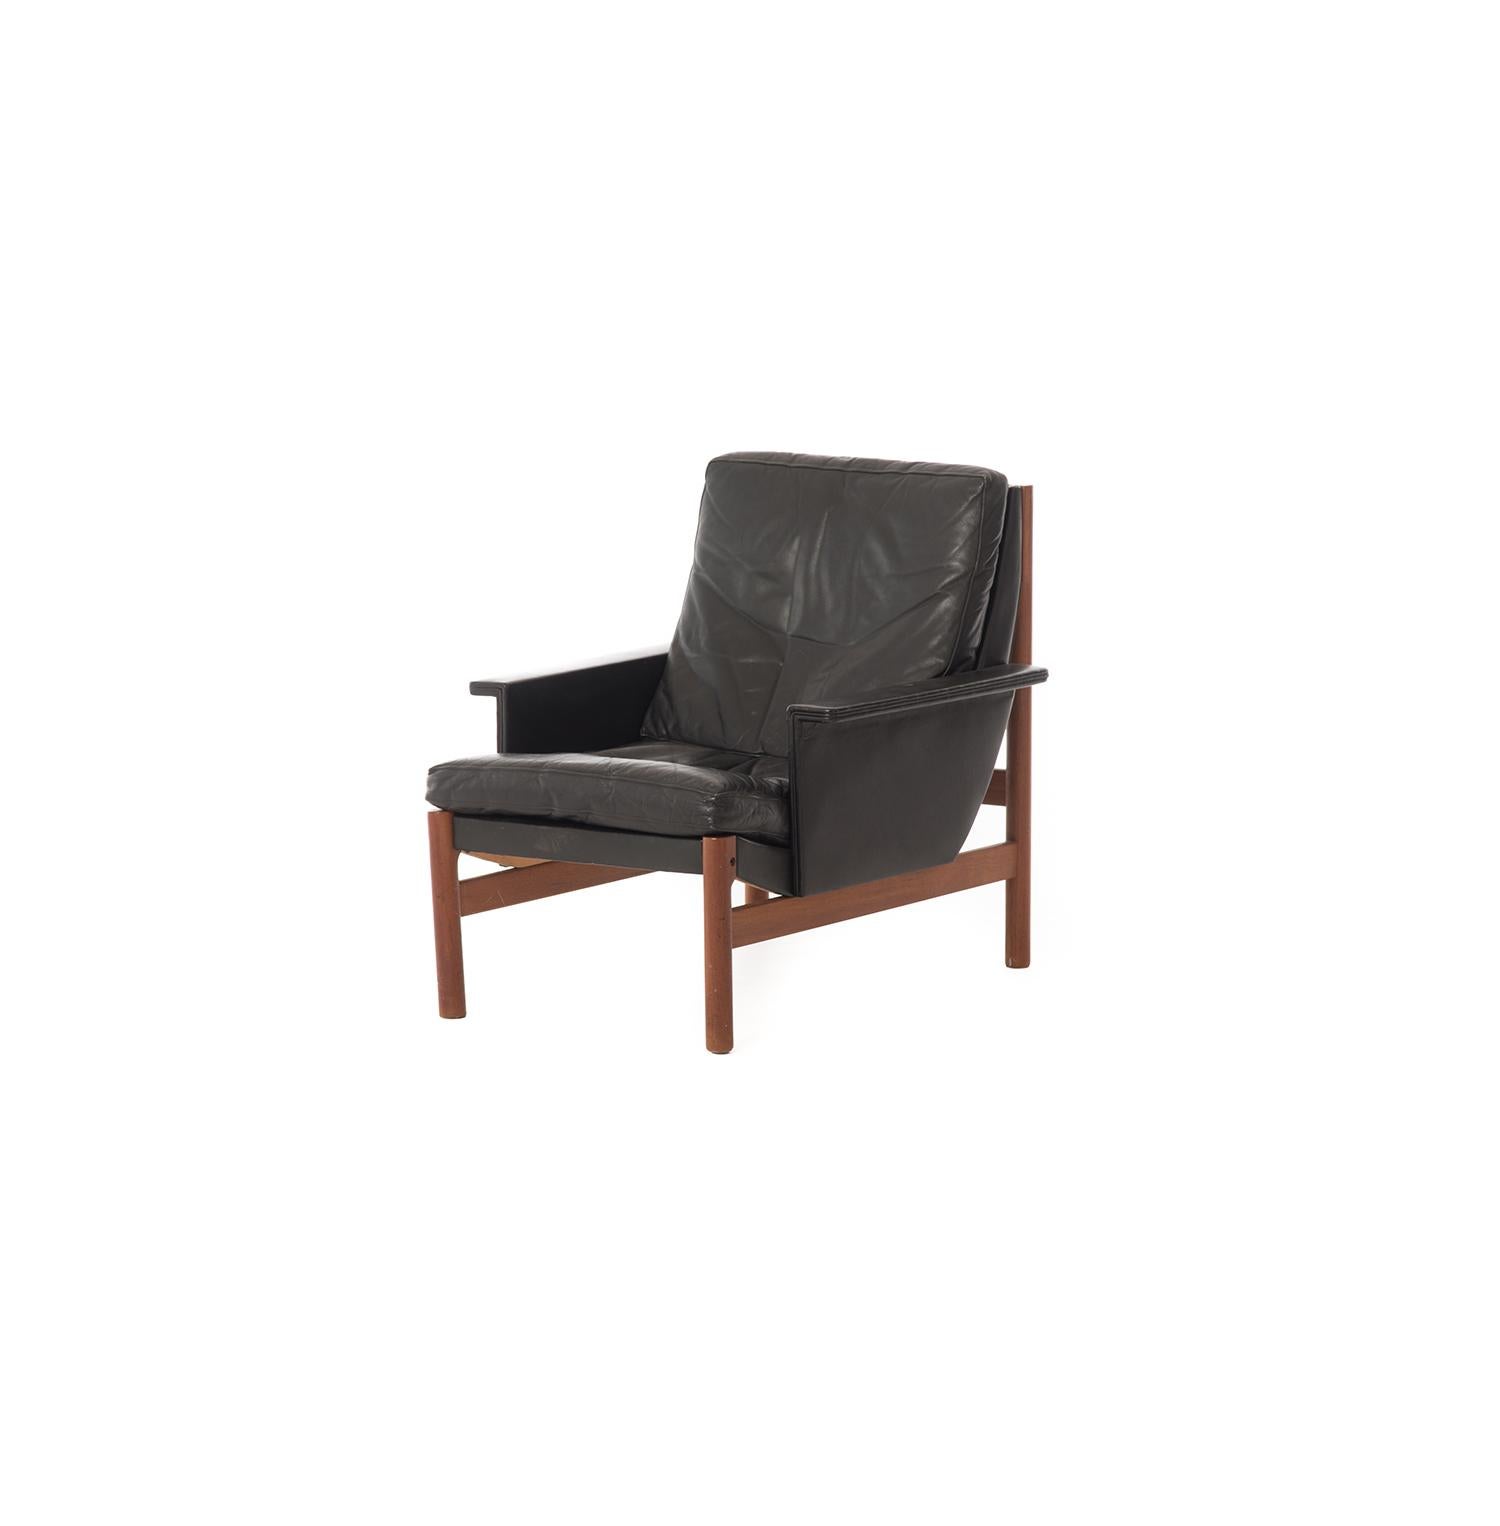 This original 1960s Danish modern lounge chair with a sweeping back angle has great lines and offers extreme comfort to boot. This might very well be your new favorite napping chair! Original black leather and springs in great condition, leather has